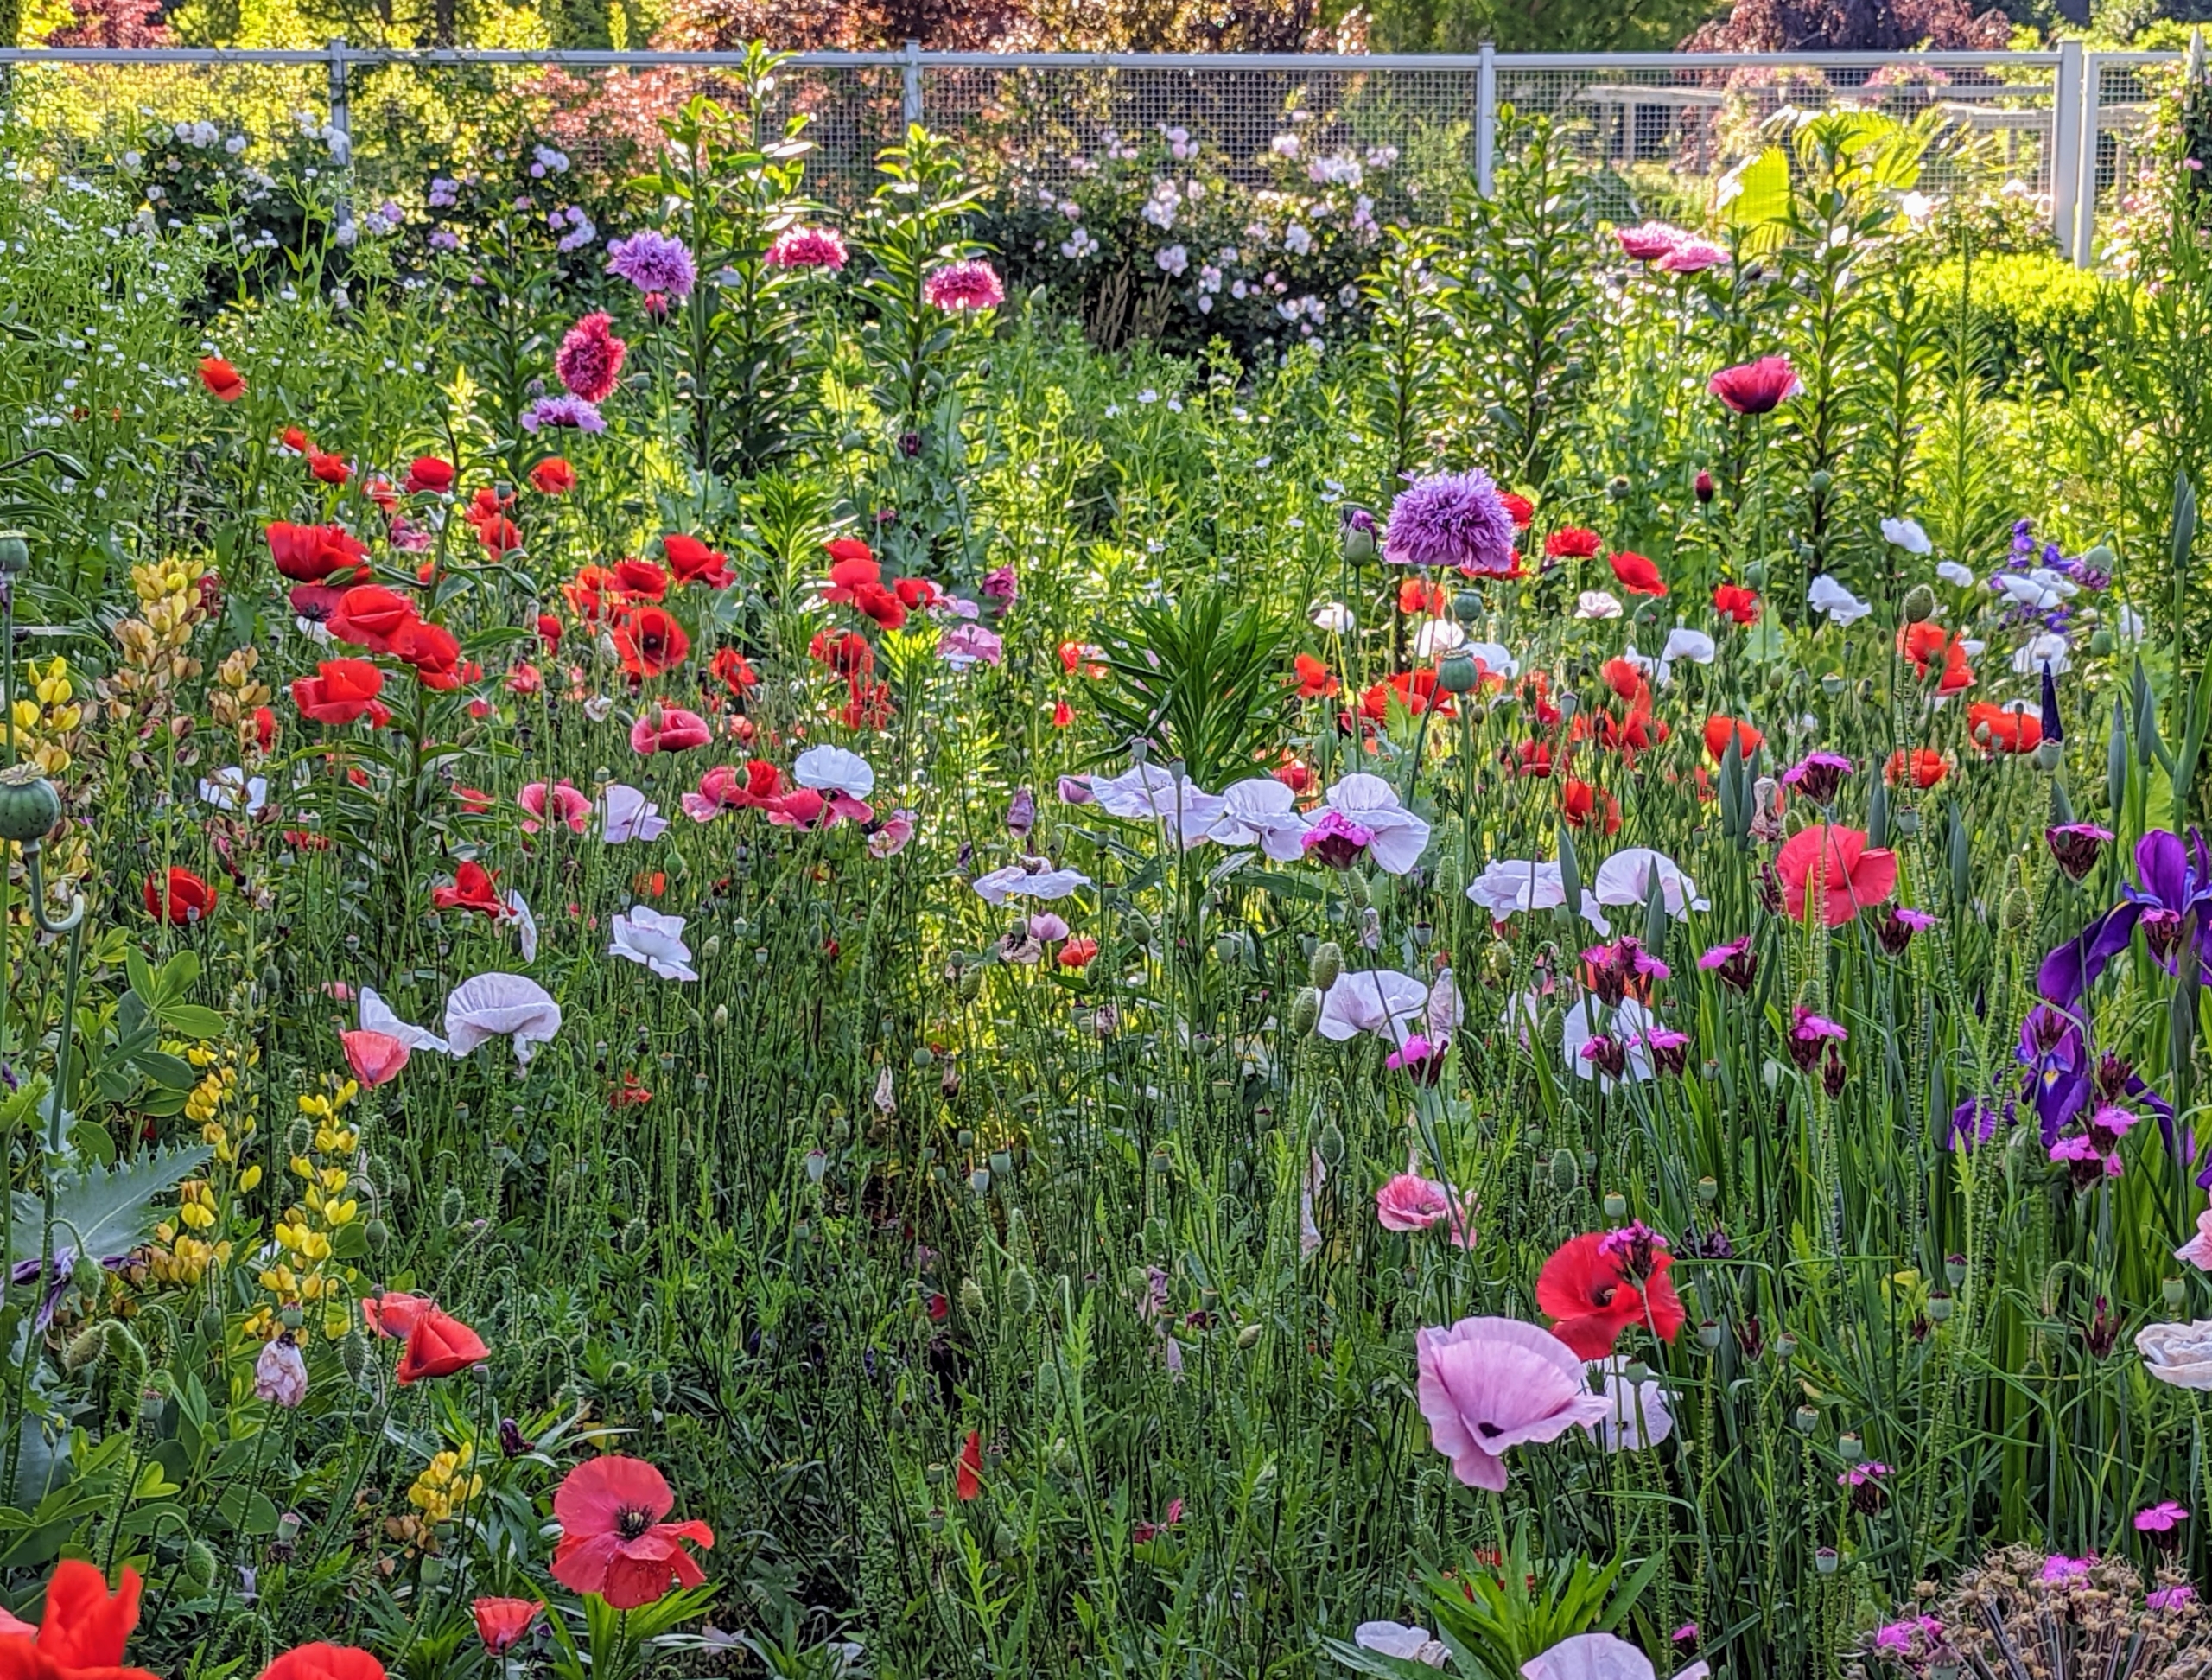 How to Plant and Care for Poppies